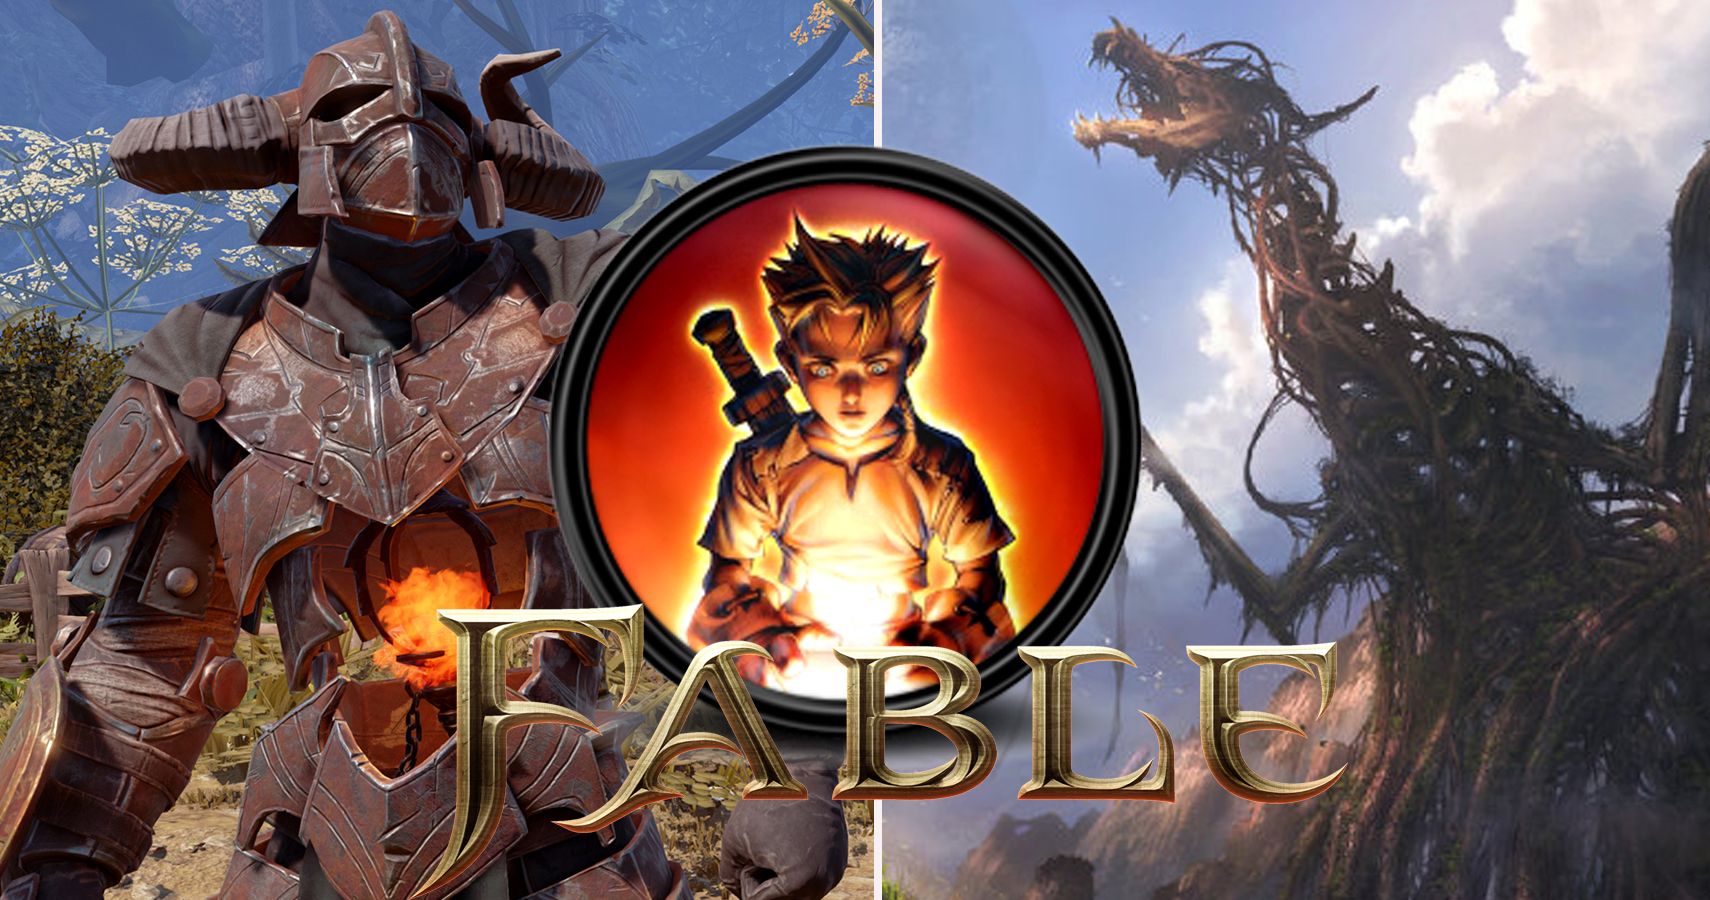 Overlappen Ambtenaren Permanent 25 Current Fable 4 Rumors That Prove How Awesome Xbox One Is - pokemonwe.com